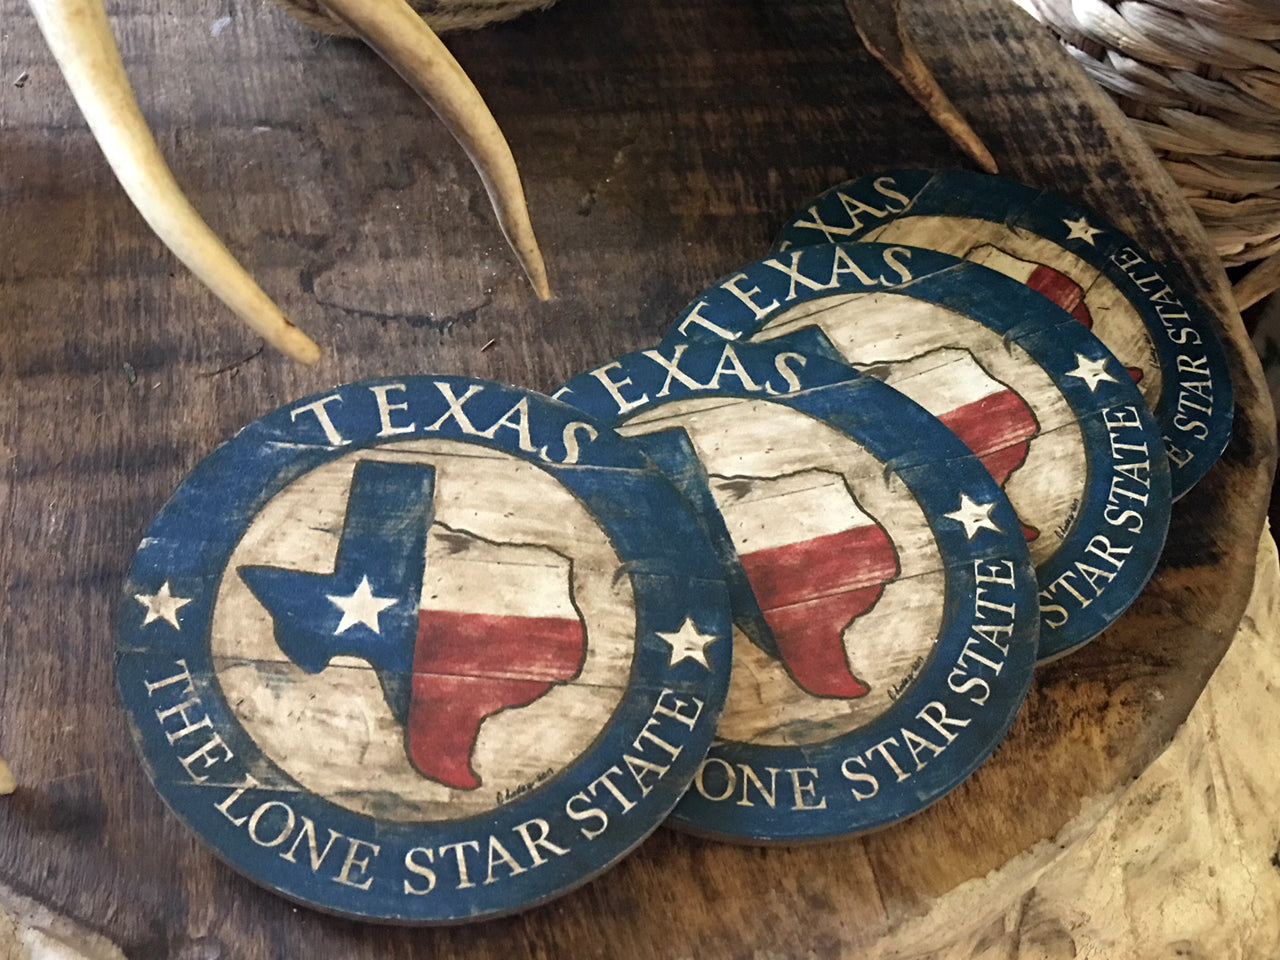 Texas State with blue border Coasters on natural hardwood